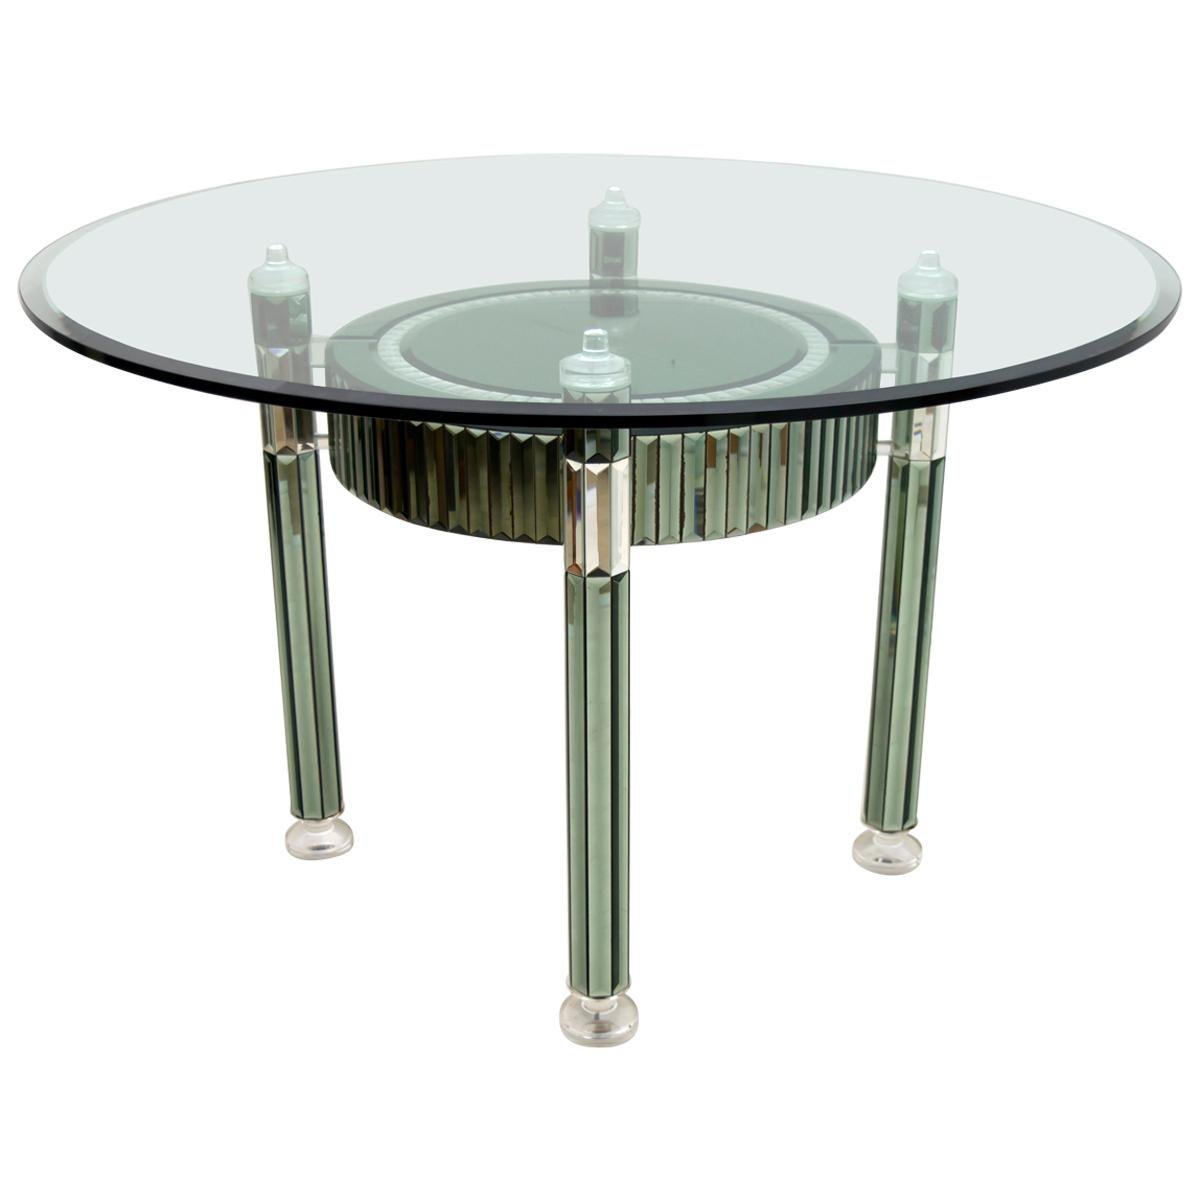 Zelino Poccioni Italian Modern Round Dining Table Mirrored Crystal for Mp2 For Sale